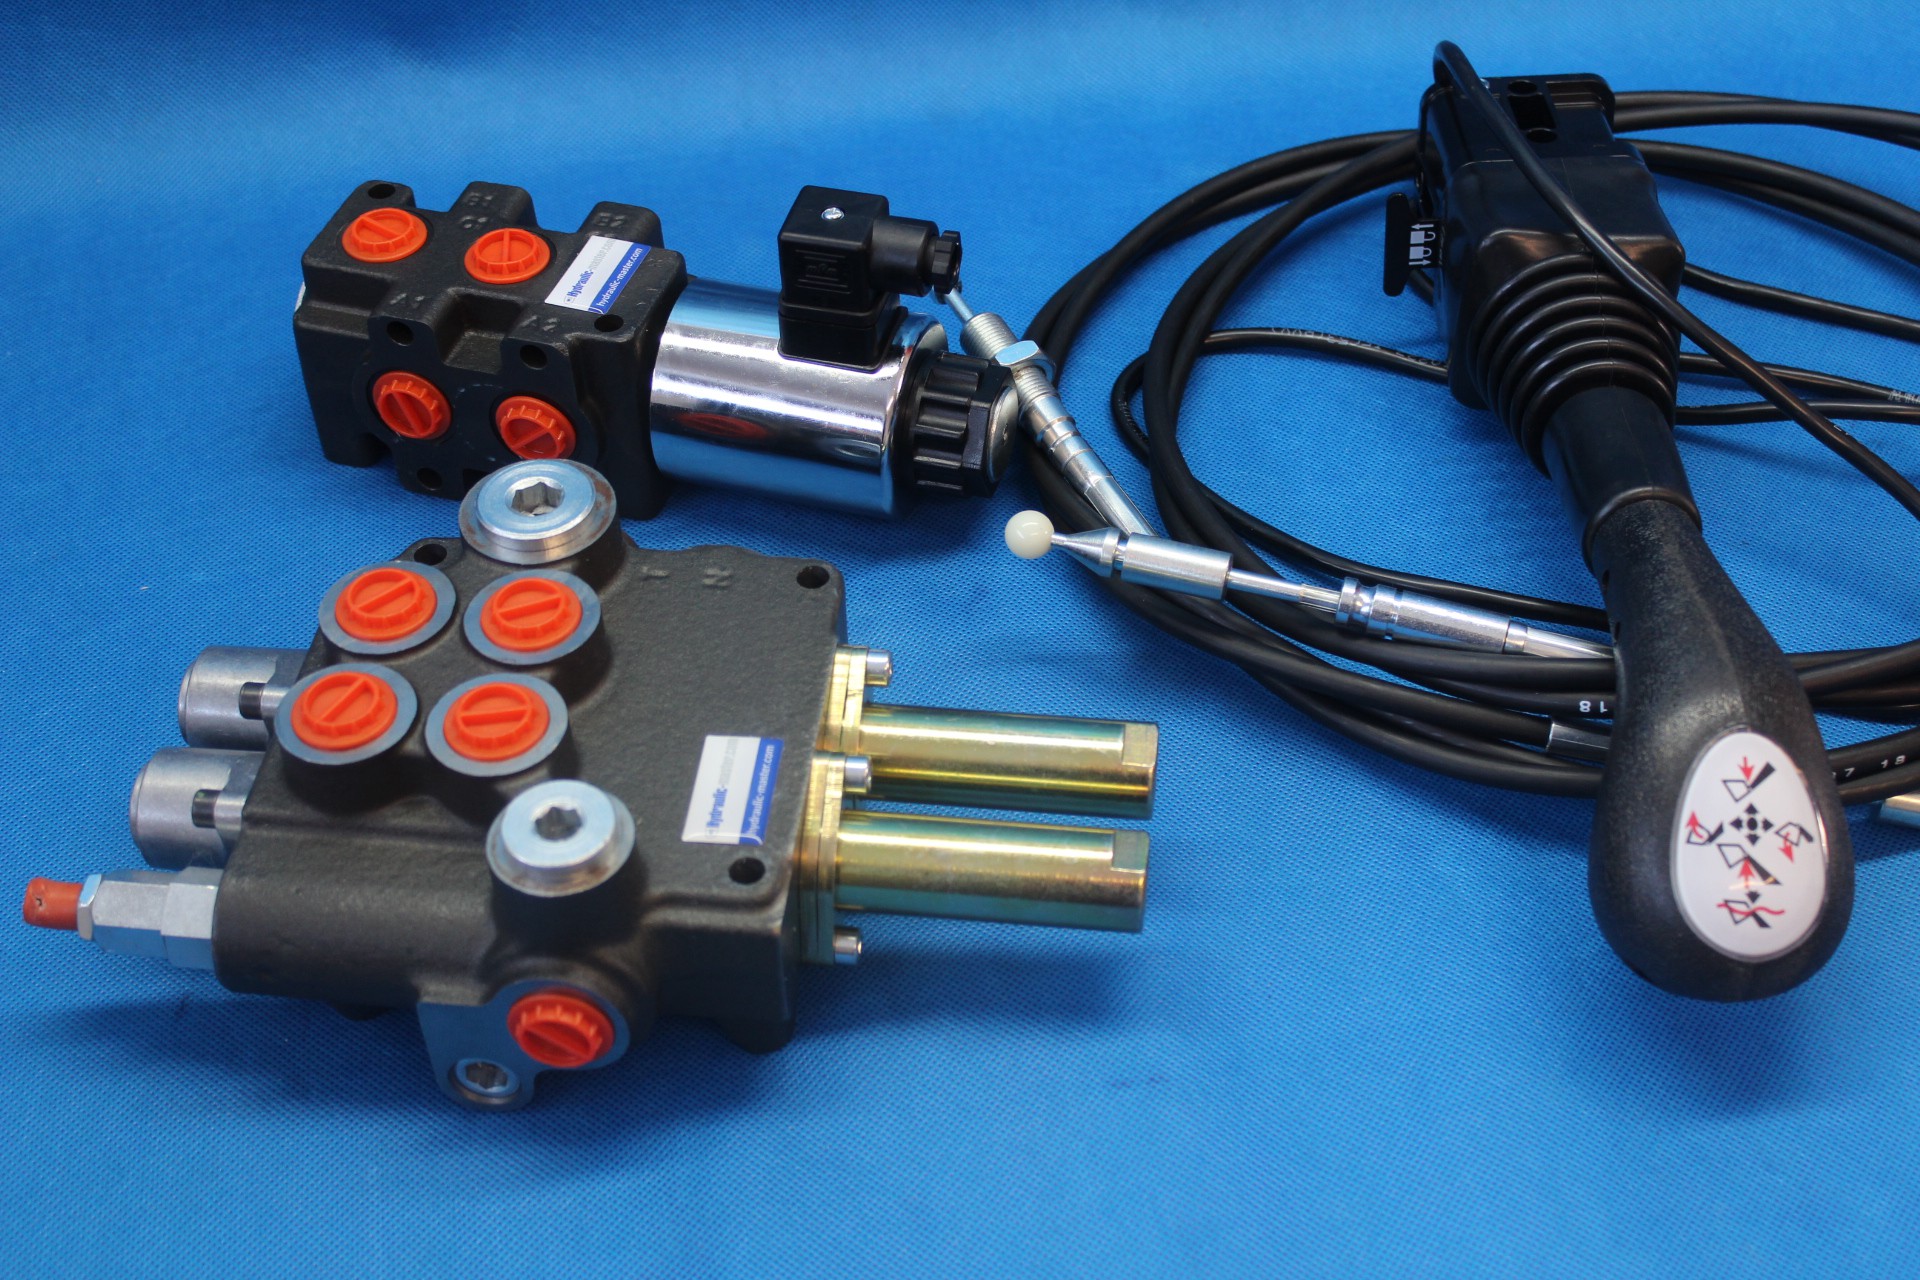 WITH THIS KIT YOU CAN CONTROL 3 SECTION USING ONE JOYSTICK